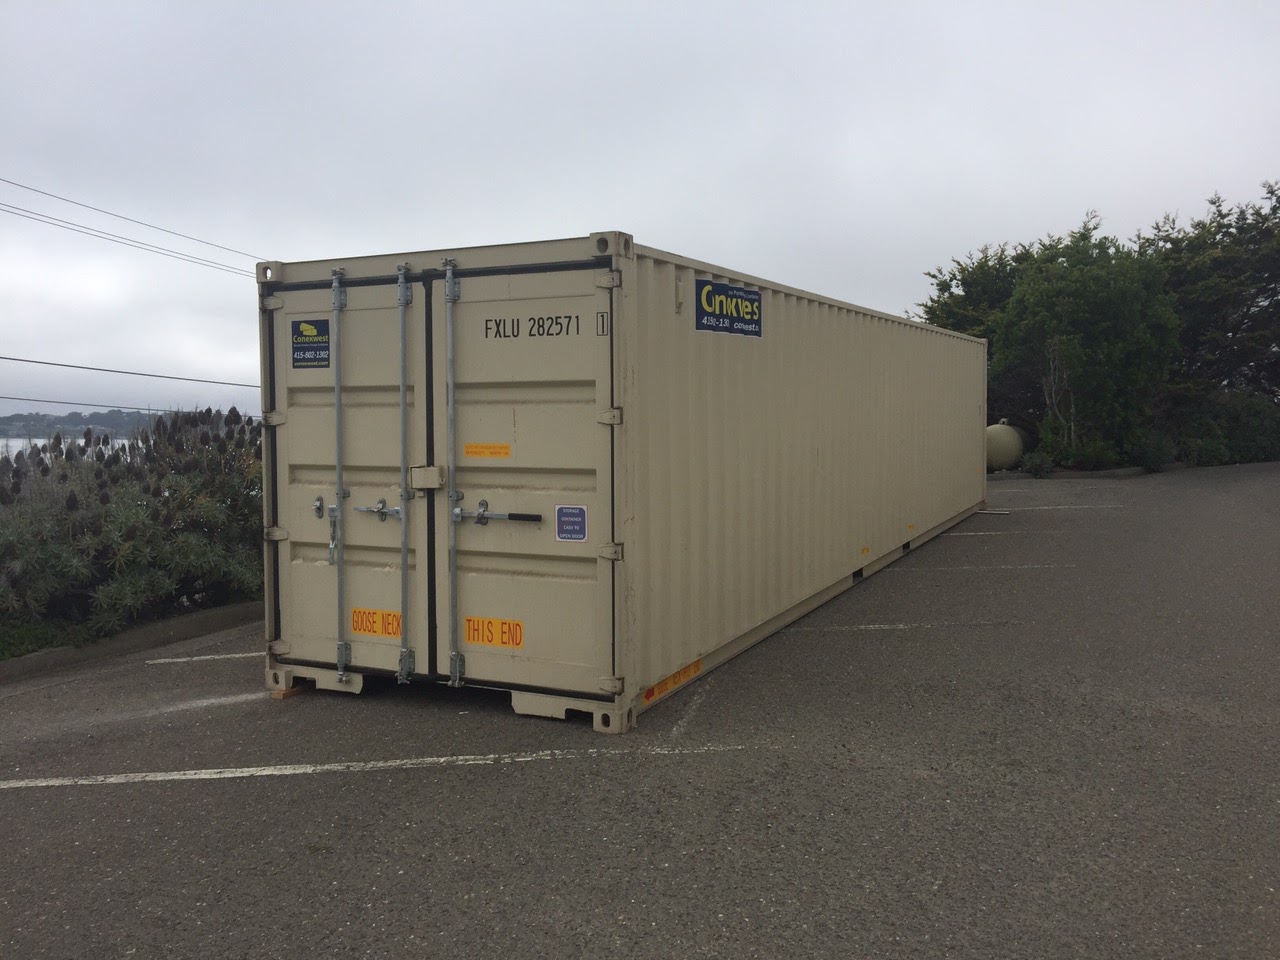 Shipping container on the side of the road with cargo doors